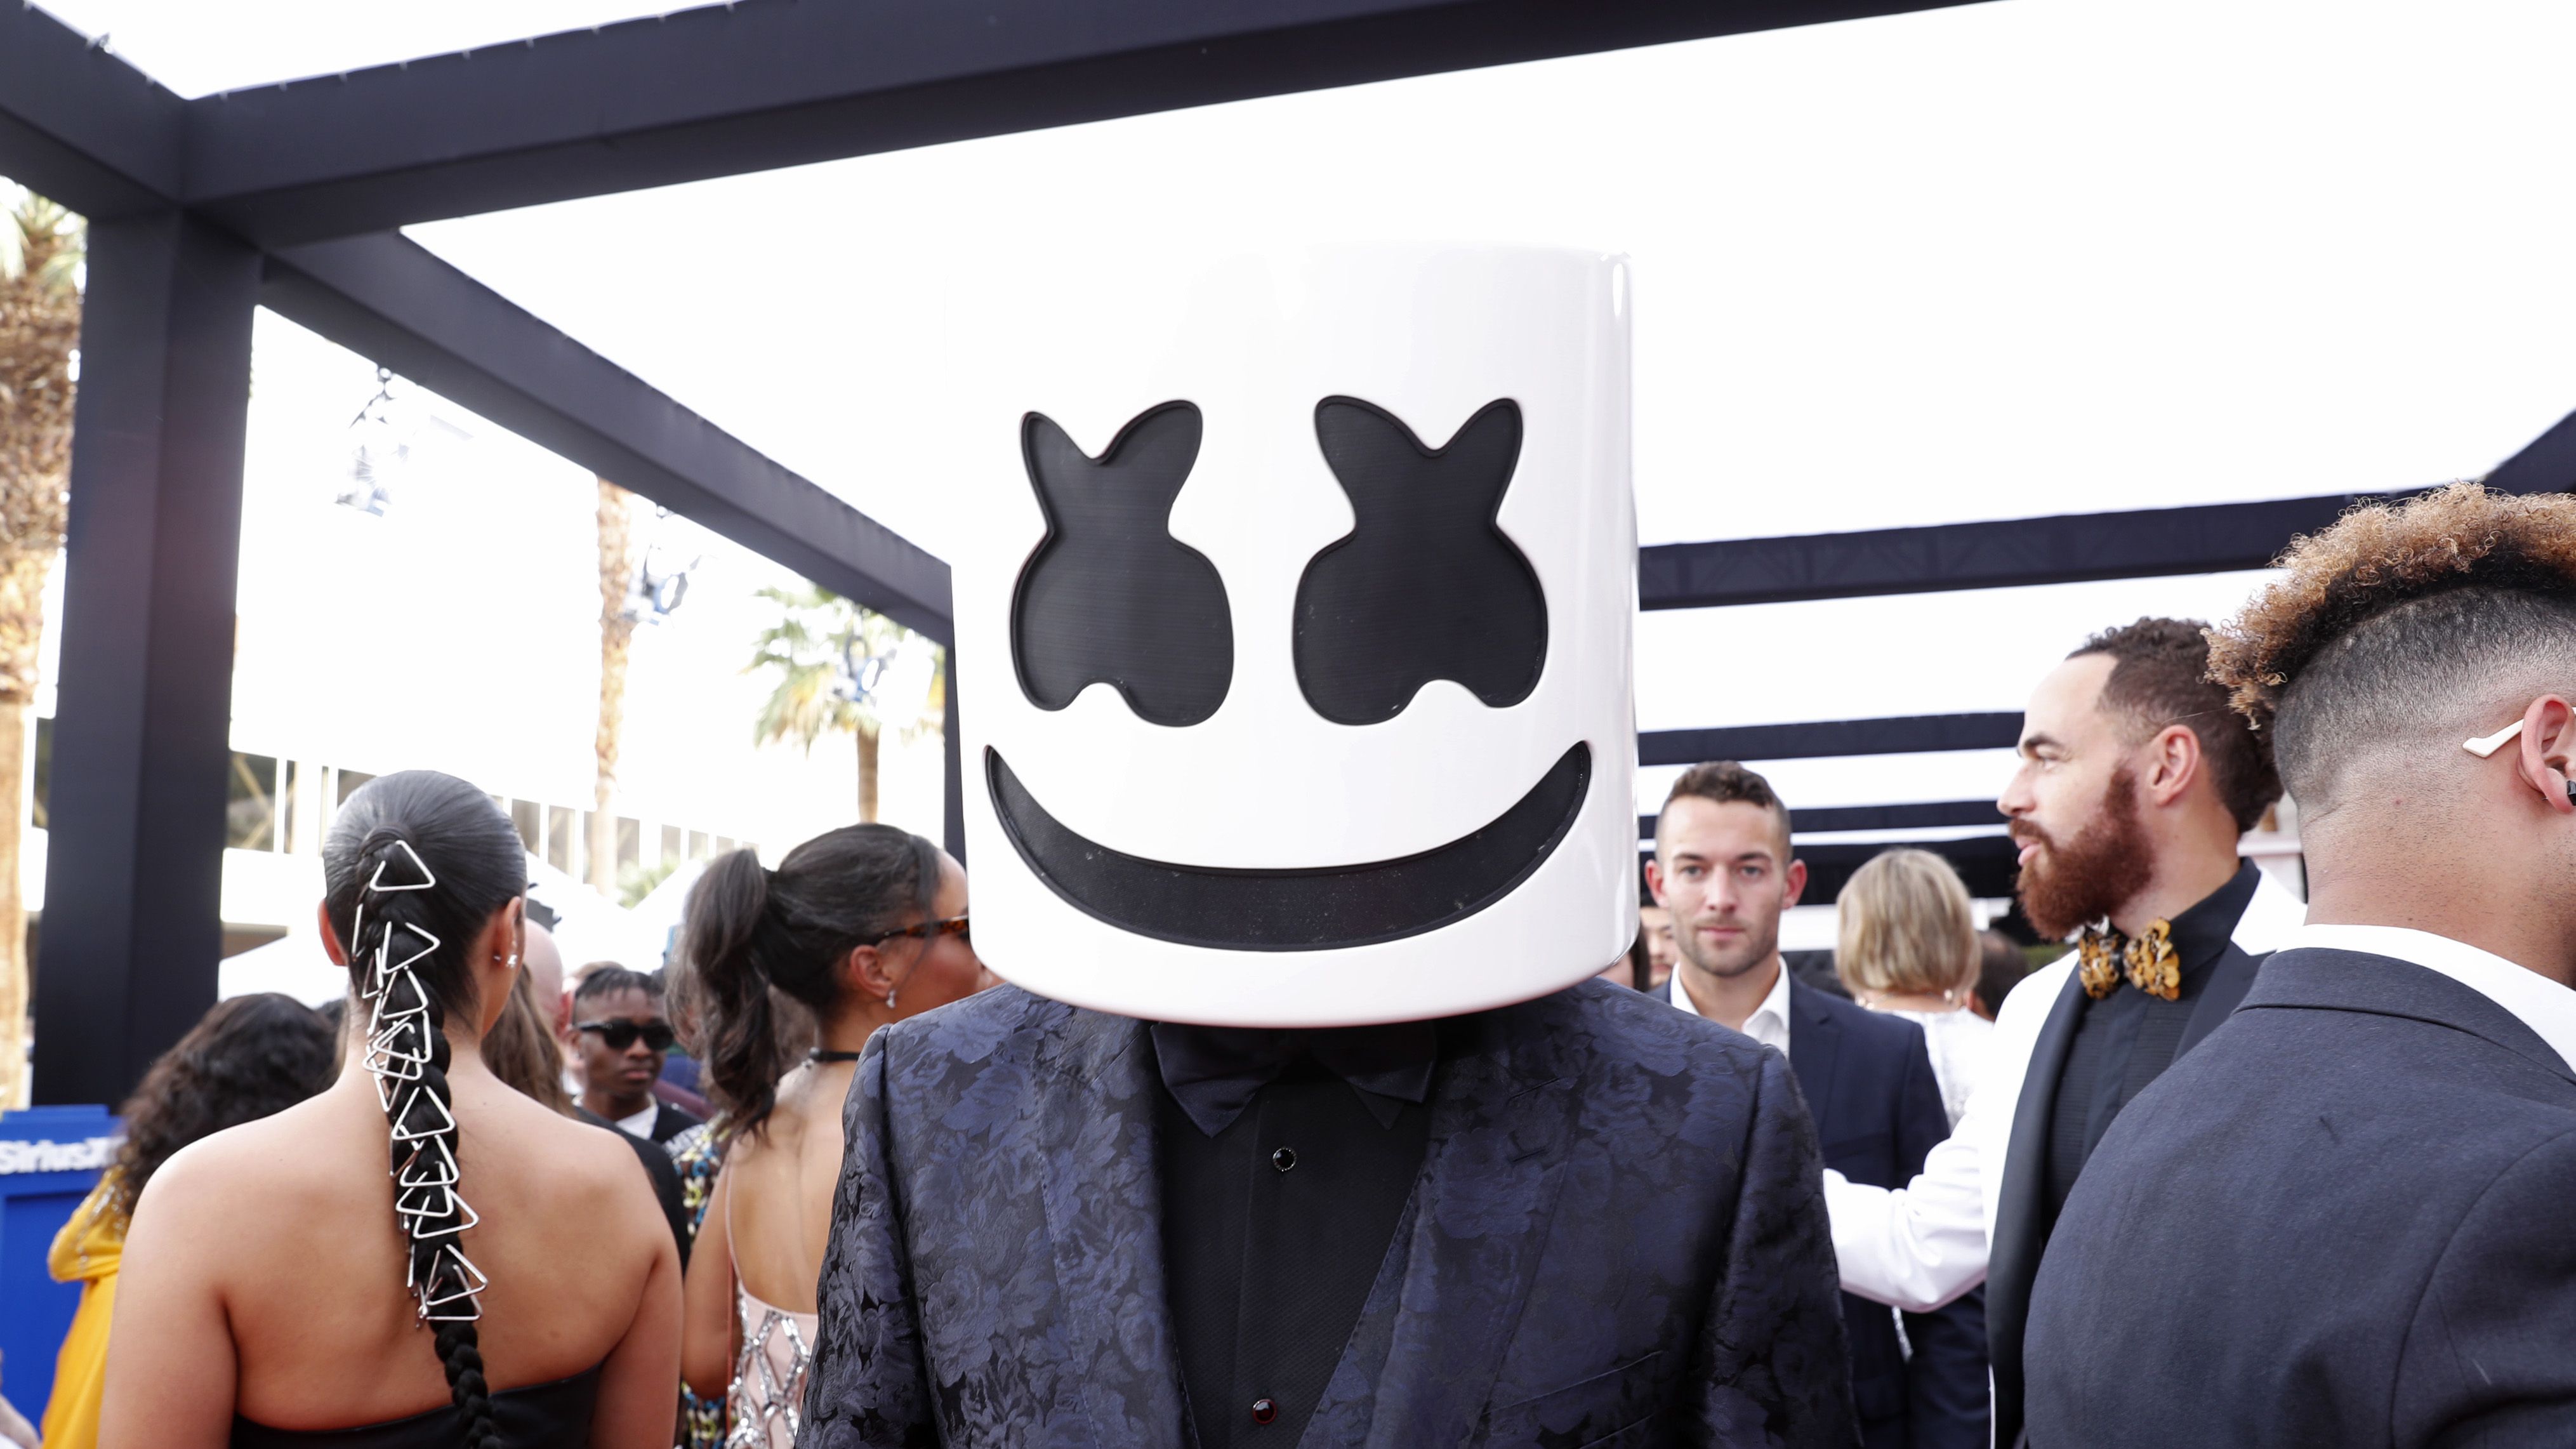 Does Marshmello's Face Look Like Under His